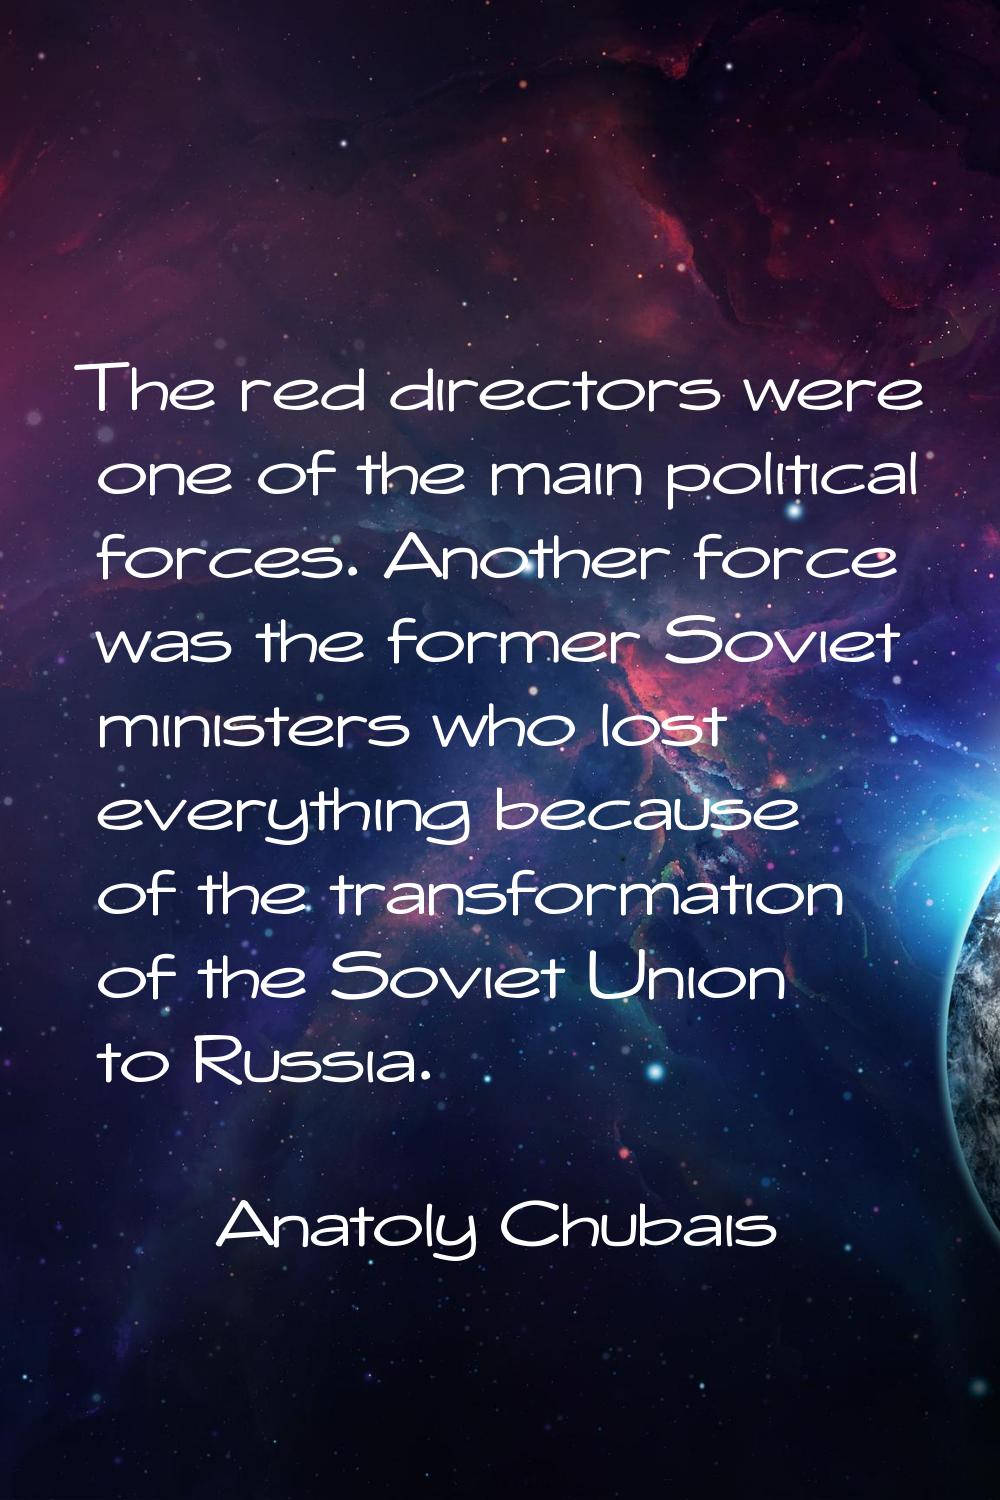 The red directors were one of the main political forces. Another force was the former Soviet minist